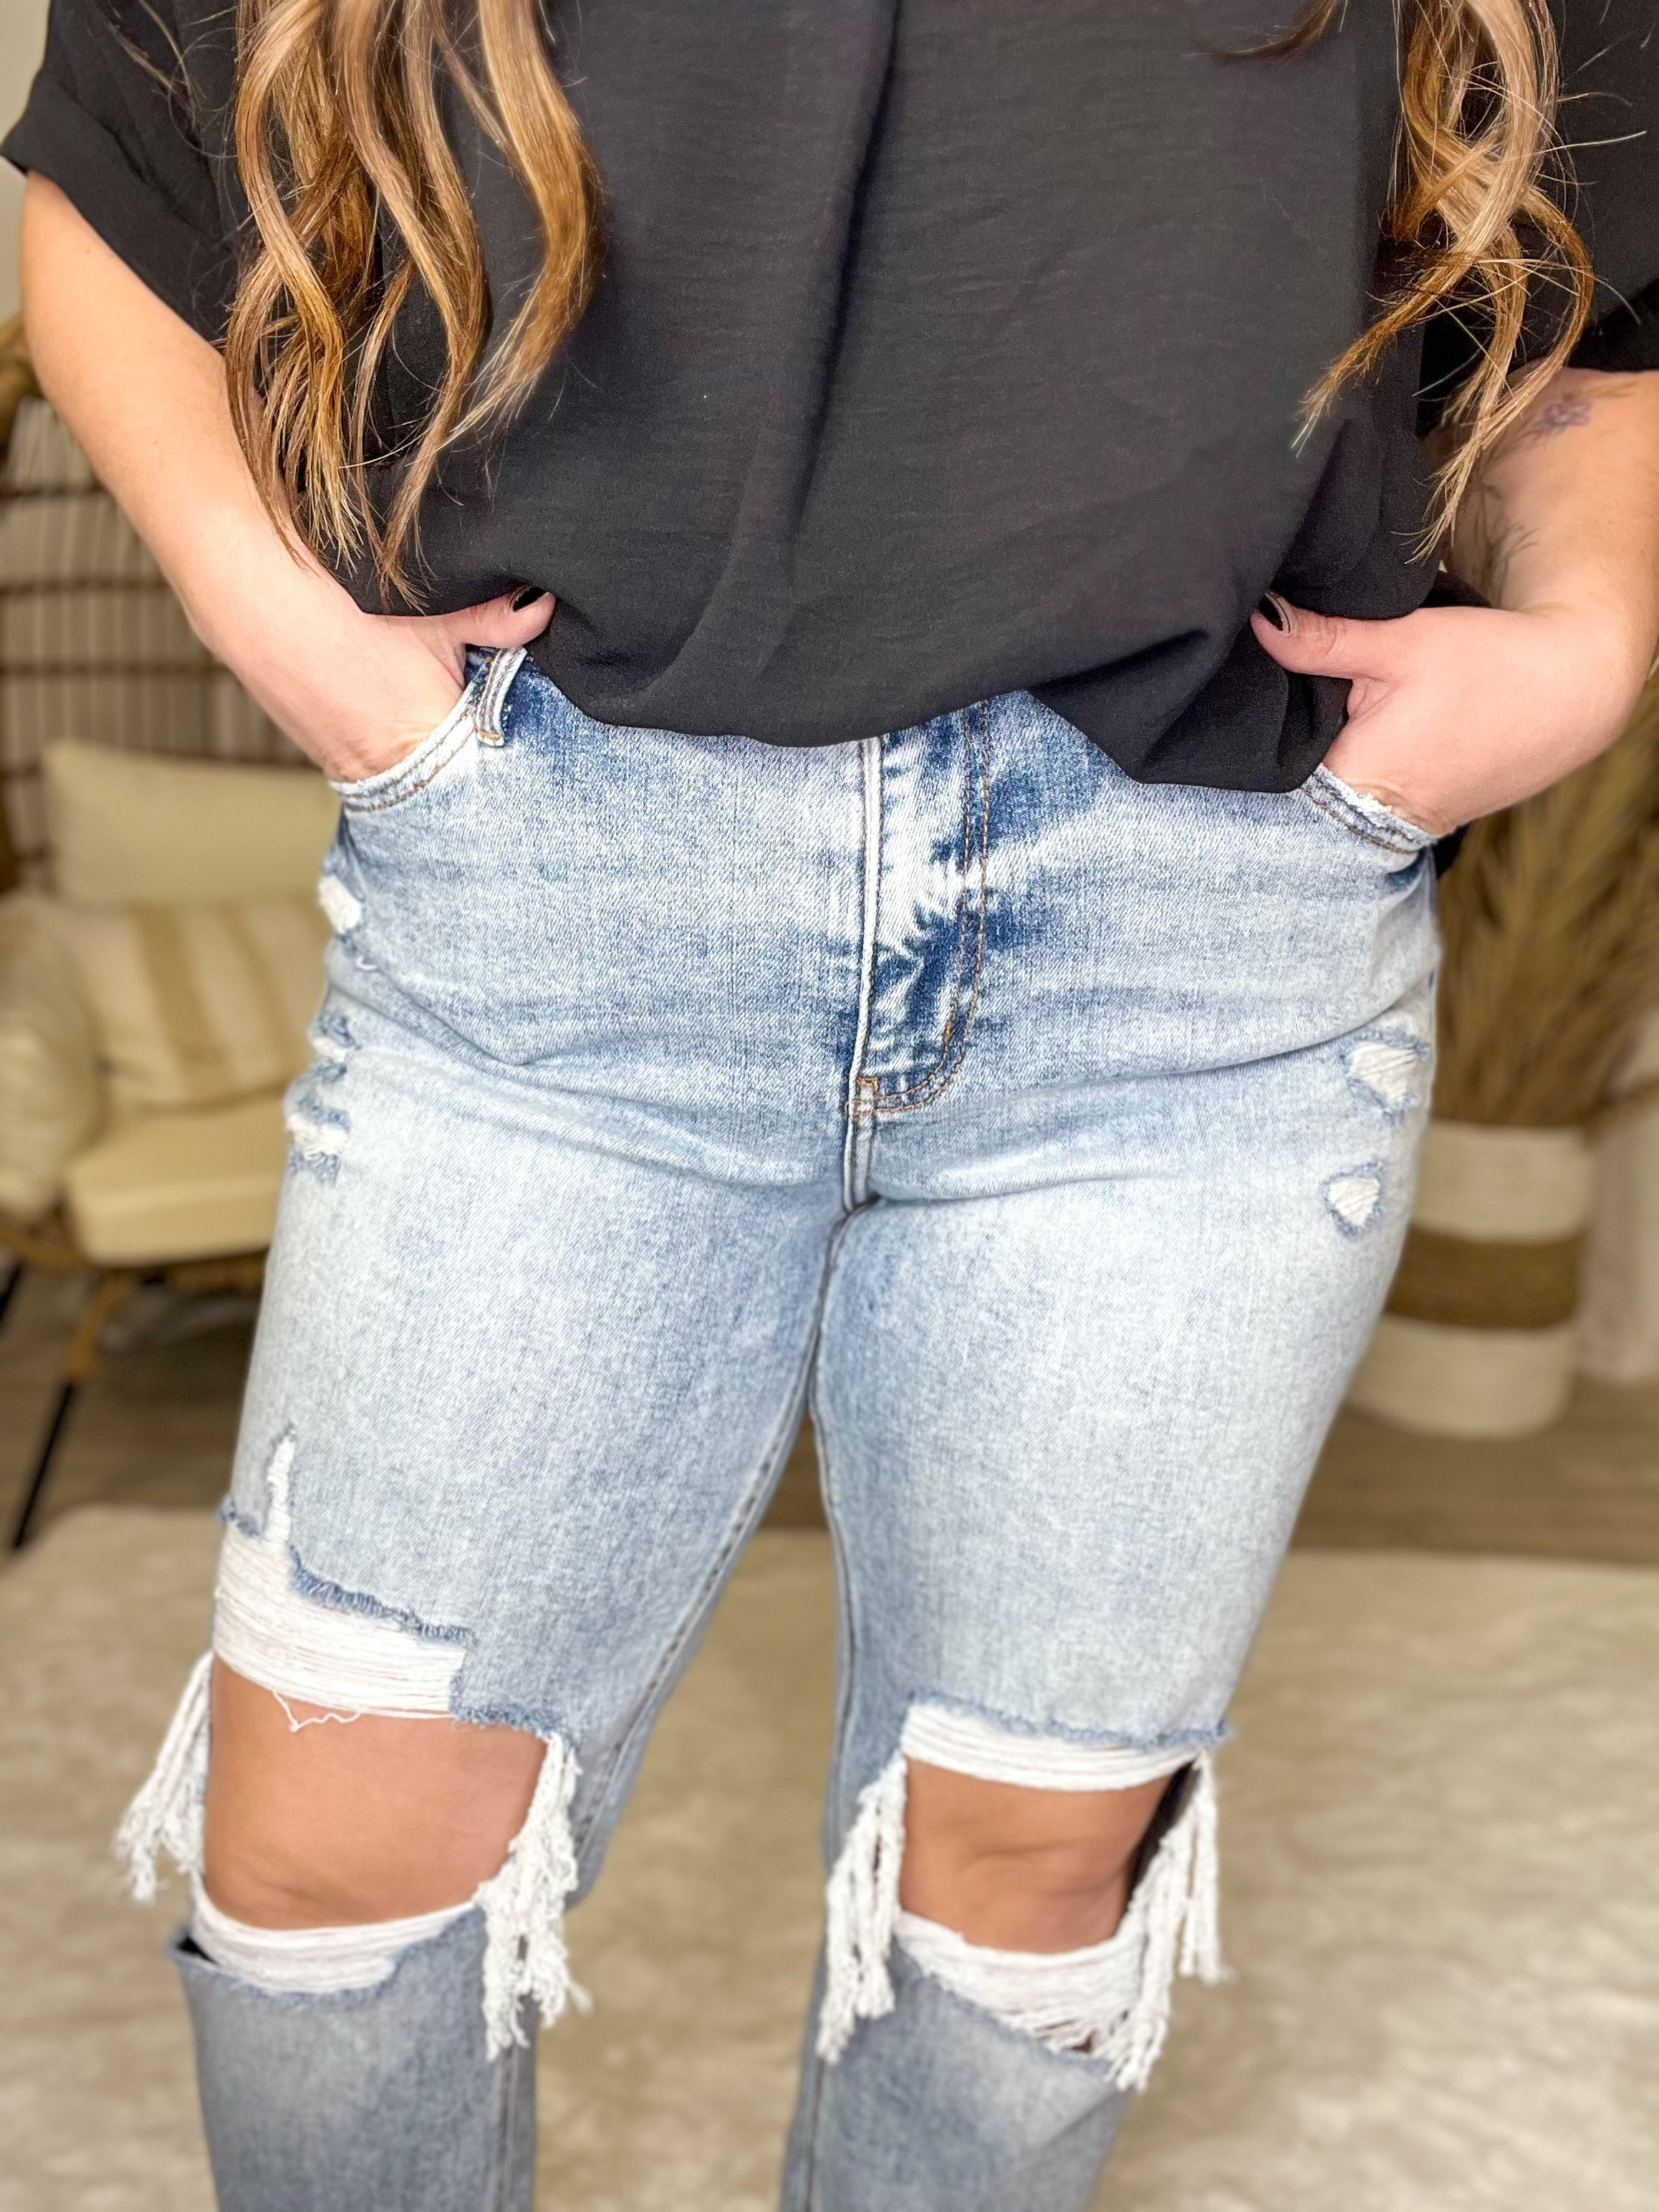 RESTOCK: Bright Eyes Crop Straight Leg Jeans-190 Jeans-Vervet-Heathered Boho Boutique, Women's Fashion and Accessories in Palmetto, FL